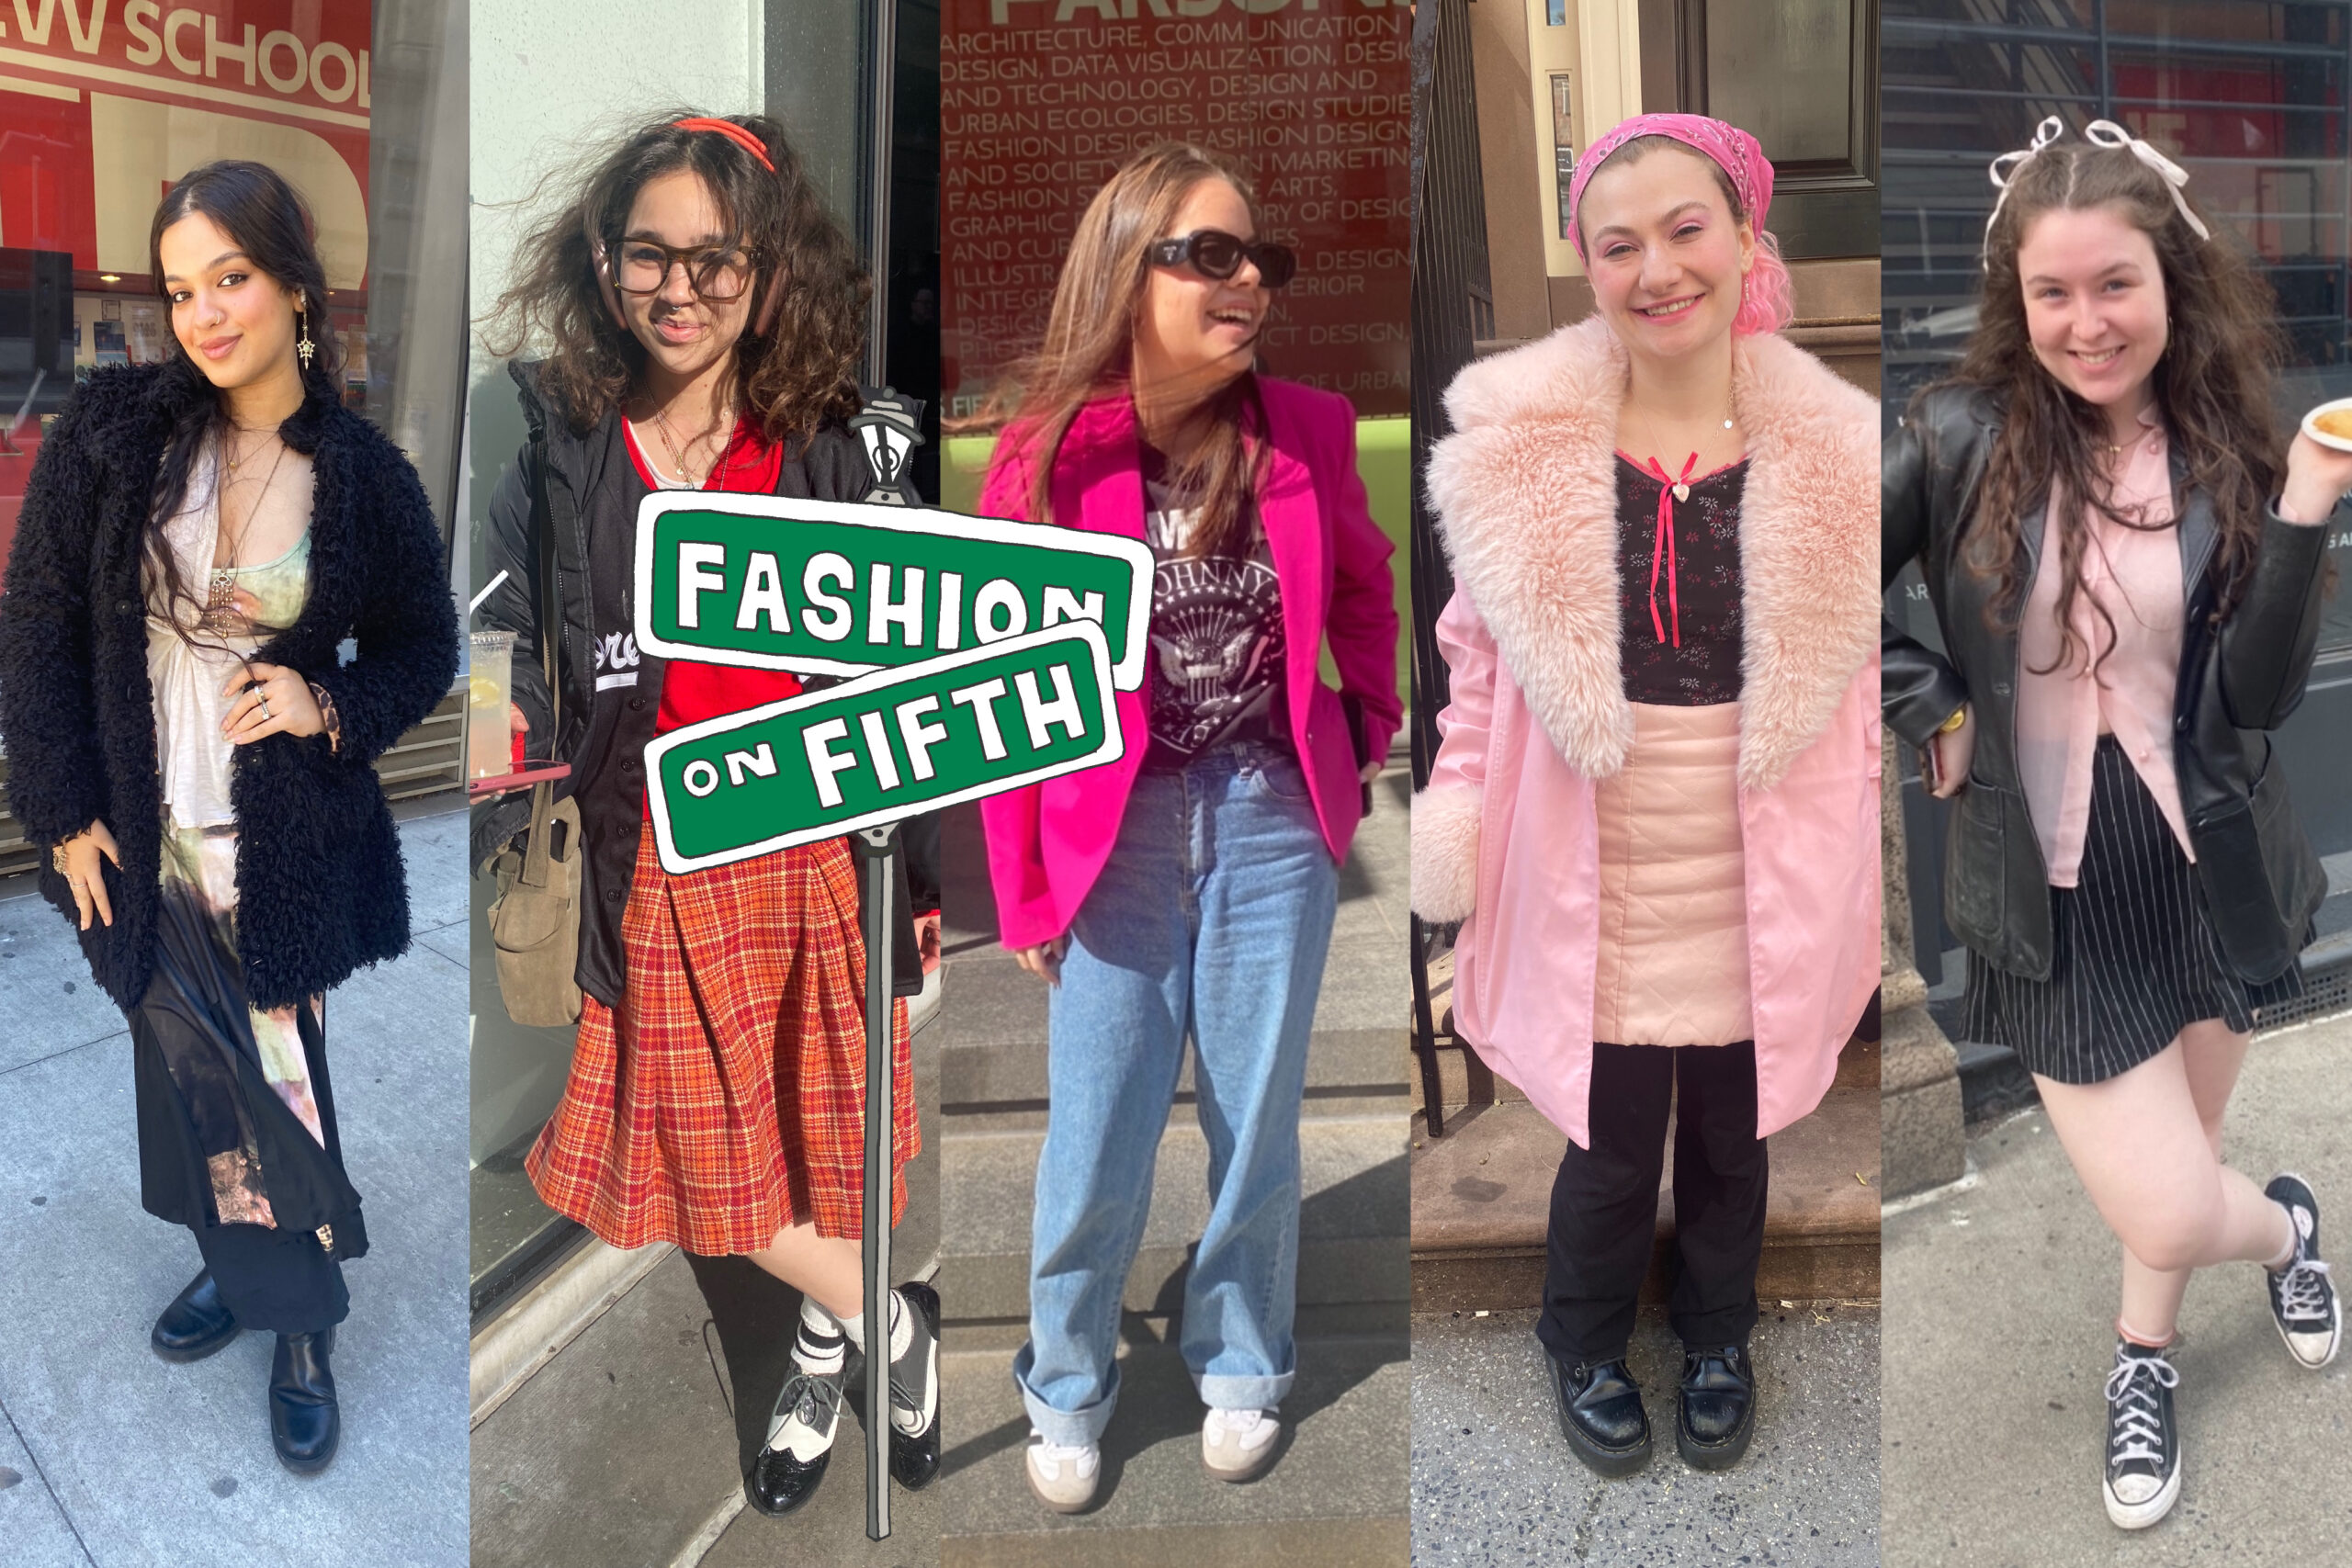 Five New School students collaged side-by-side. Toward the middle is an illustrated street sign that says “Fashion on Fifth.”